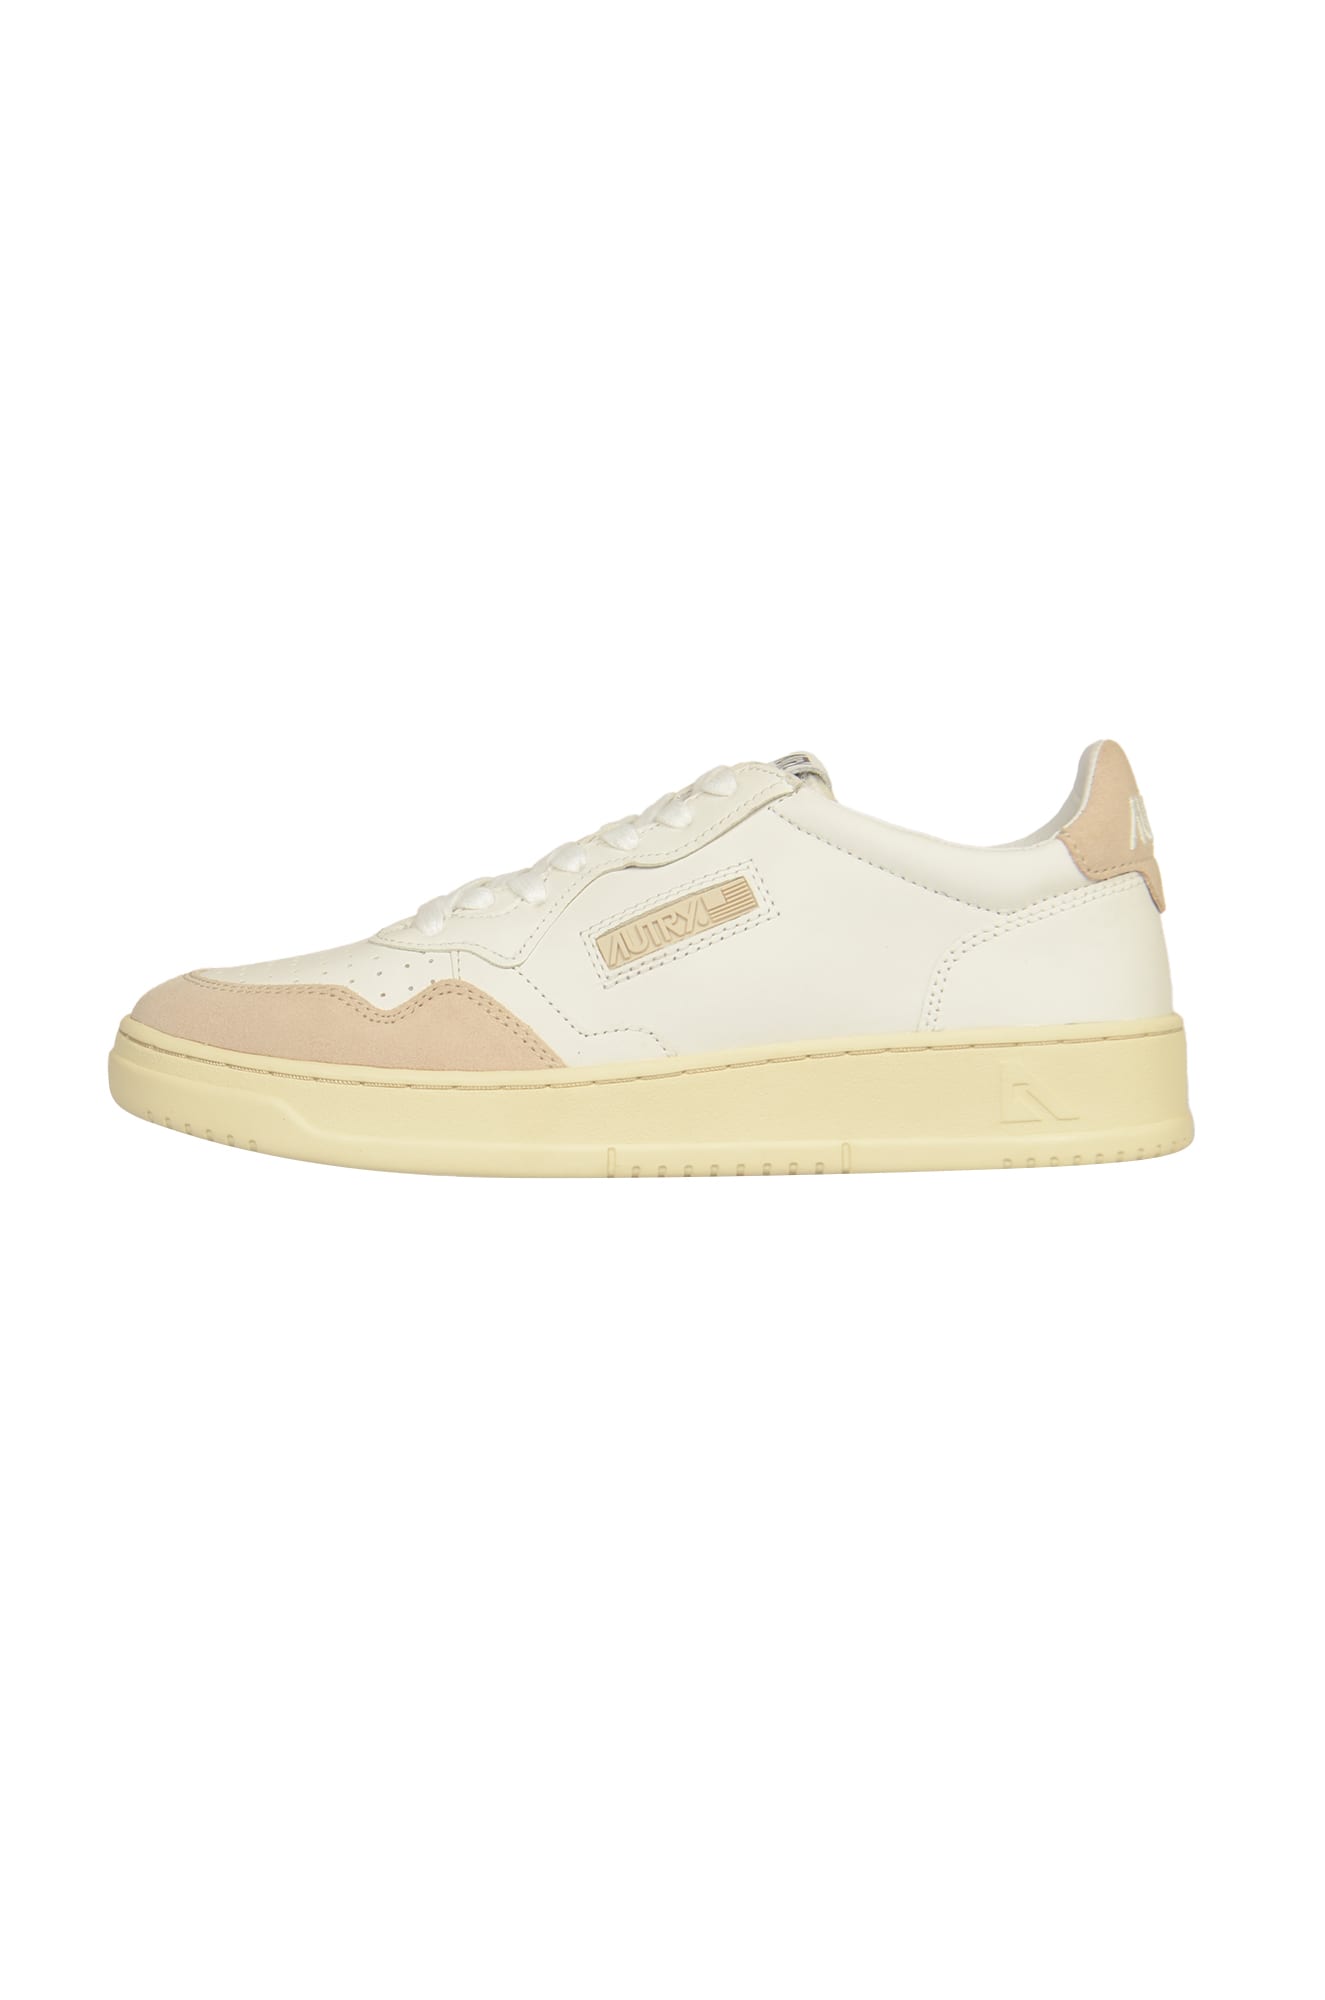 Autry Medalist Low Sneakers In White/sand